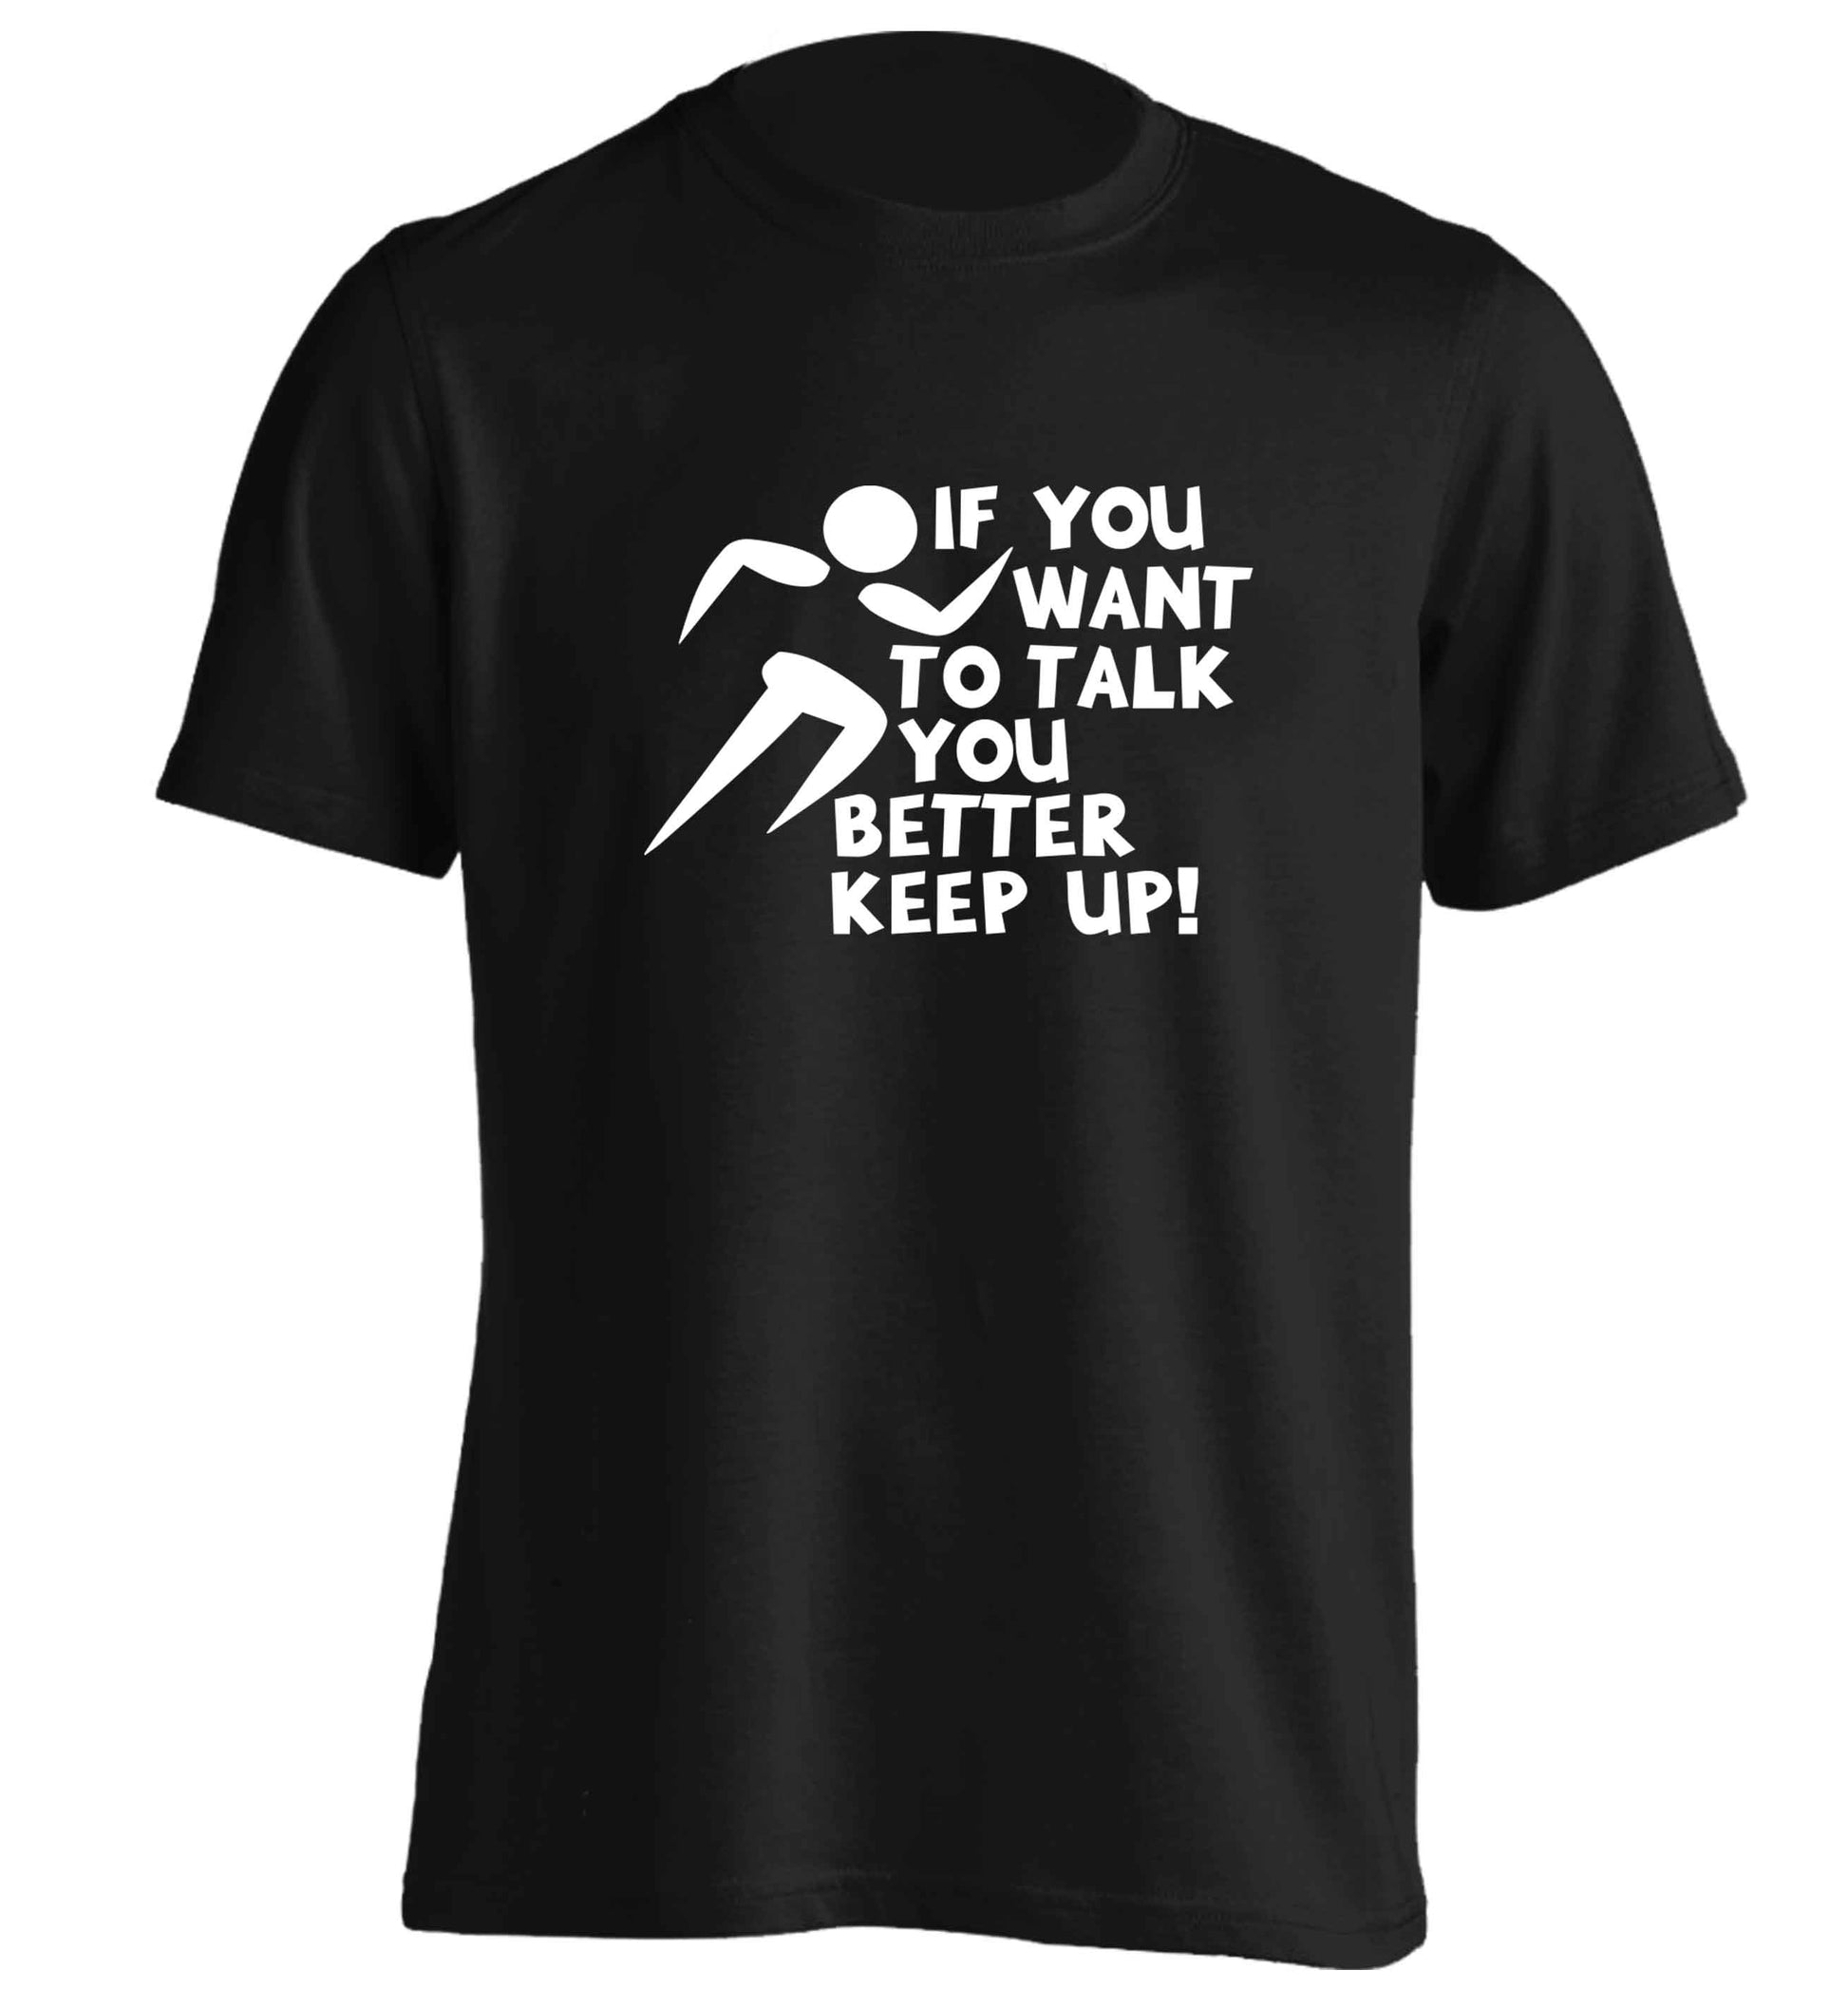 If you want to talk you better keep up! adults unisex black Tshirt 2XL